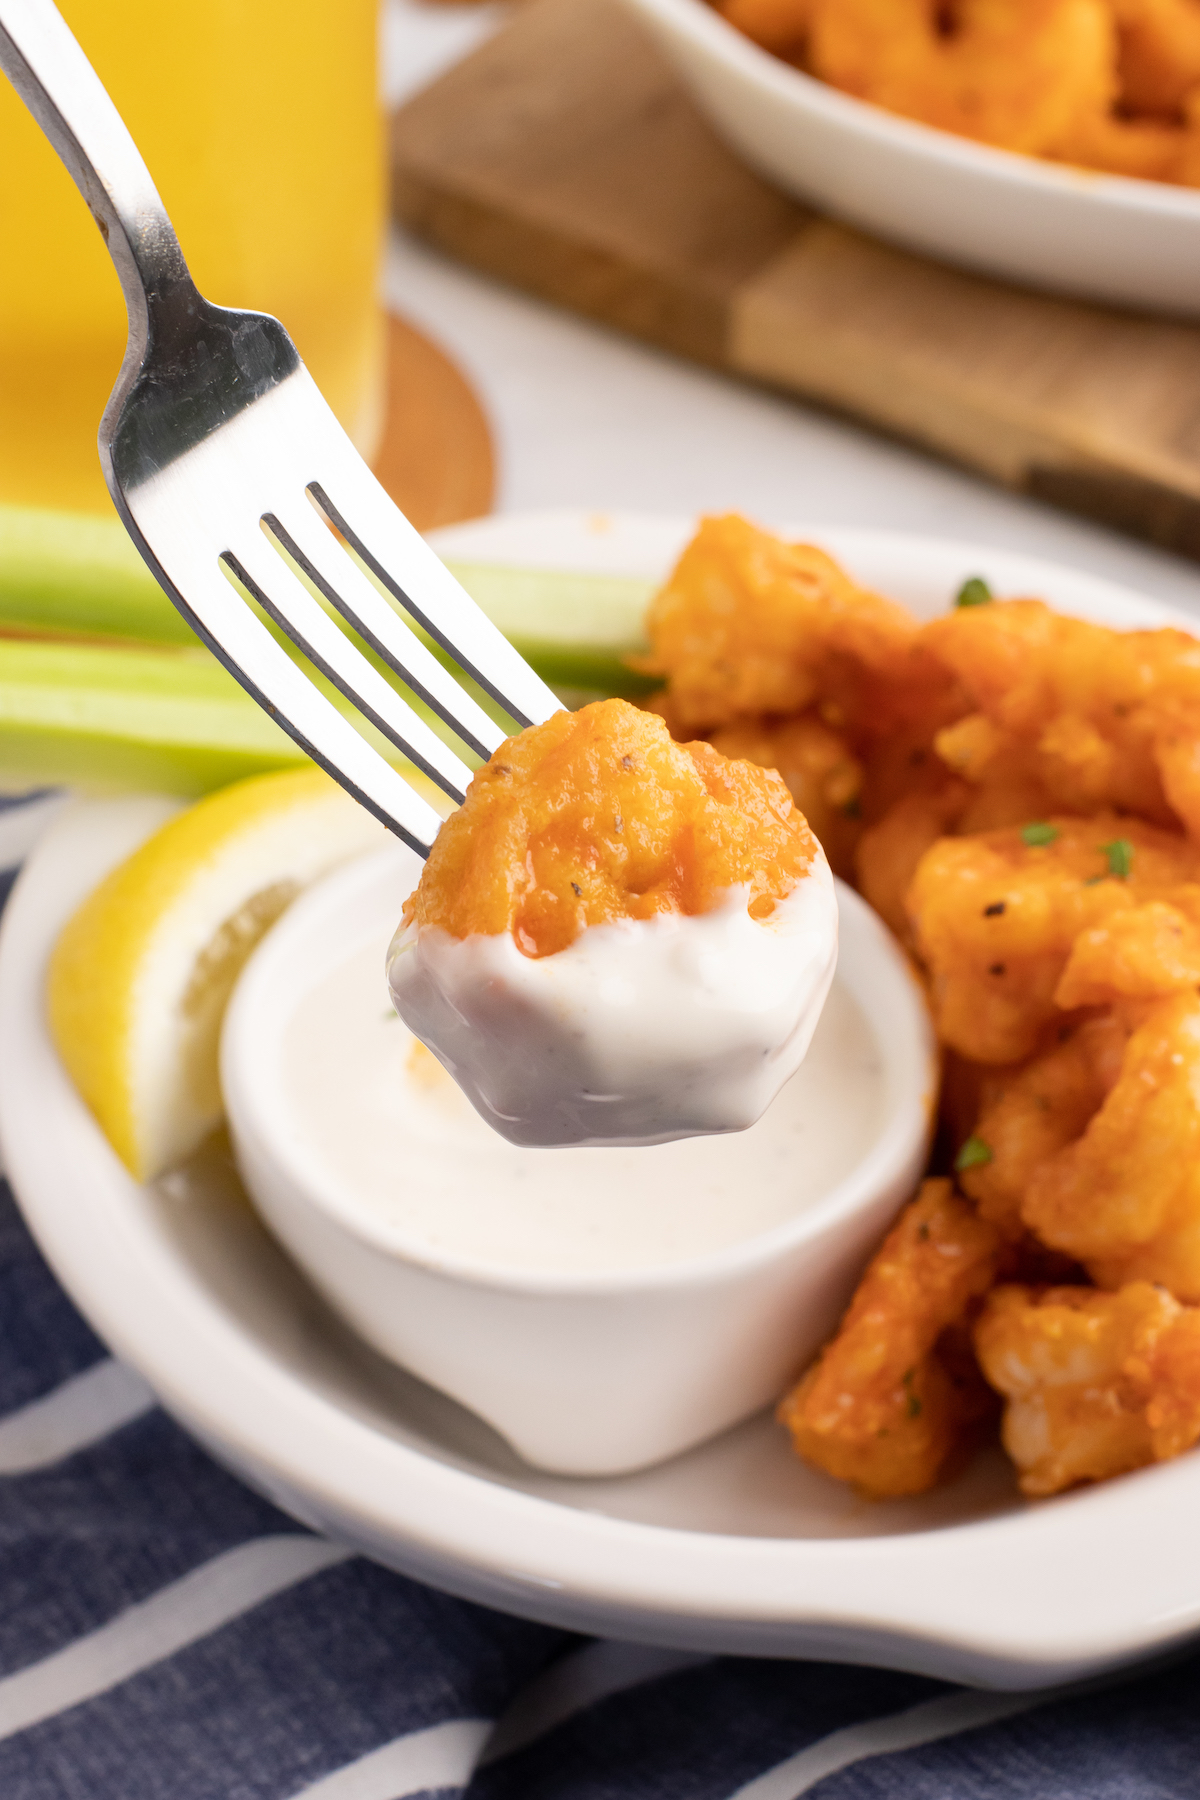 A fork holds up a buffalo shrimp that has been dipped in ranch dressing.